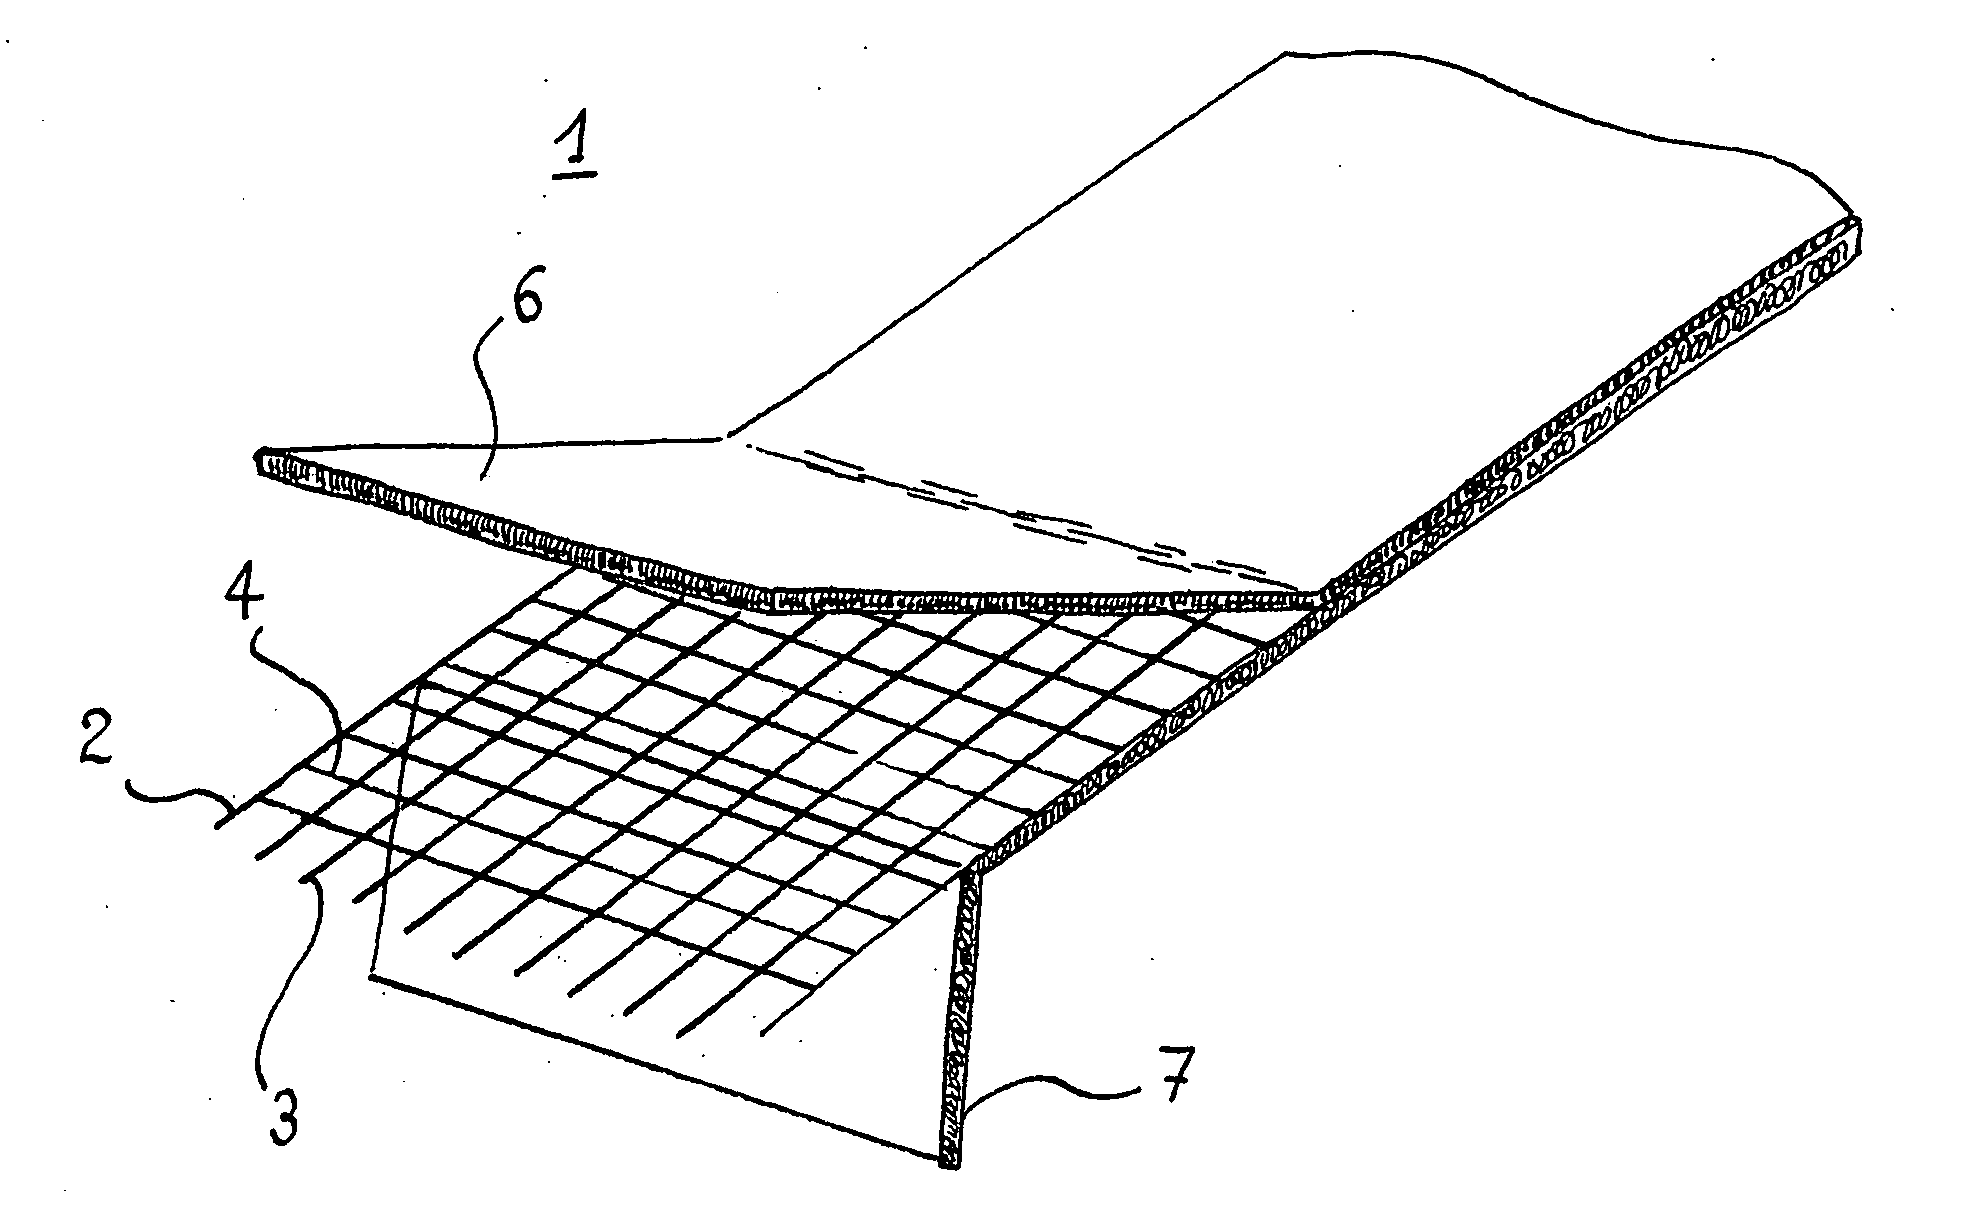 Textile composite intended for mechanical reinforcement of a bitumen-based waterproof coating